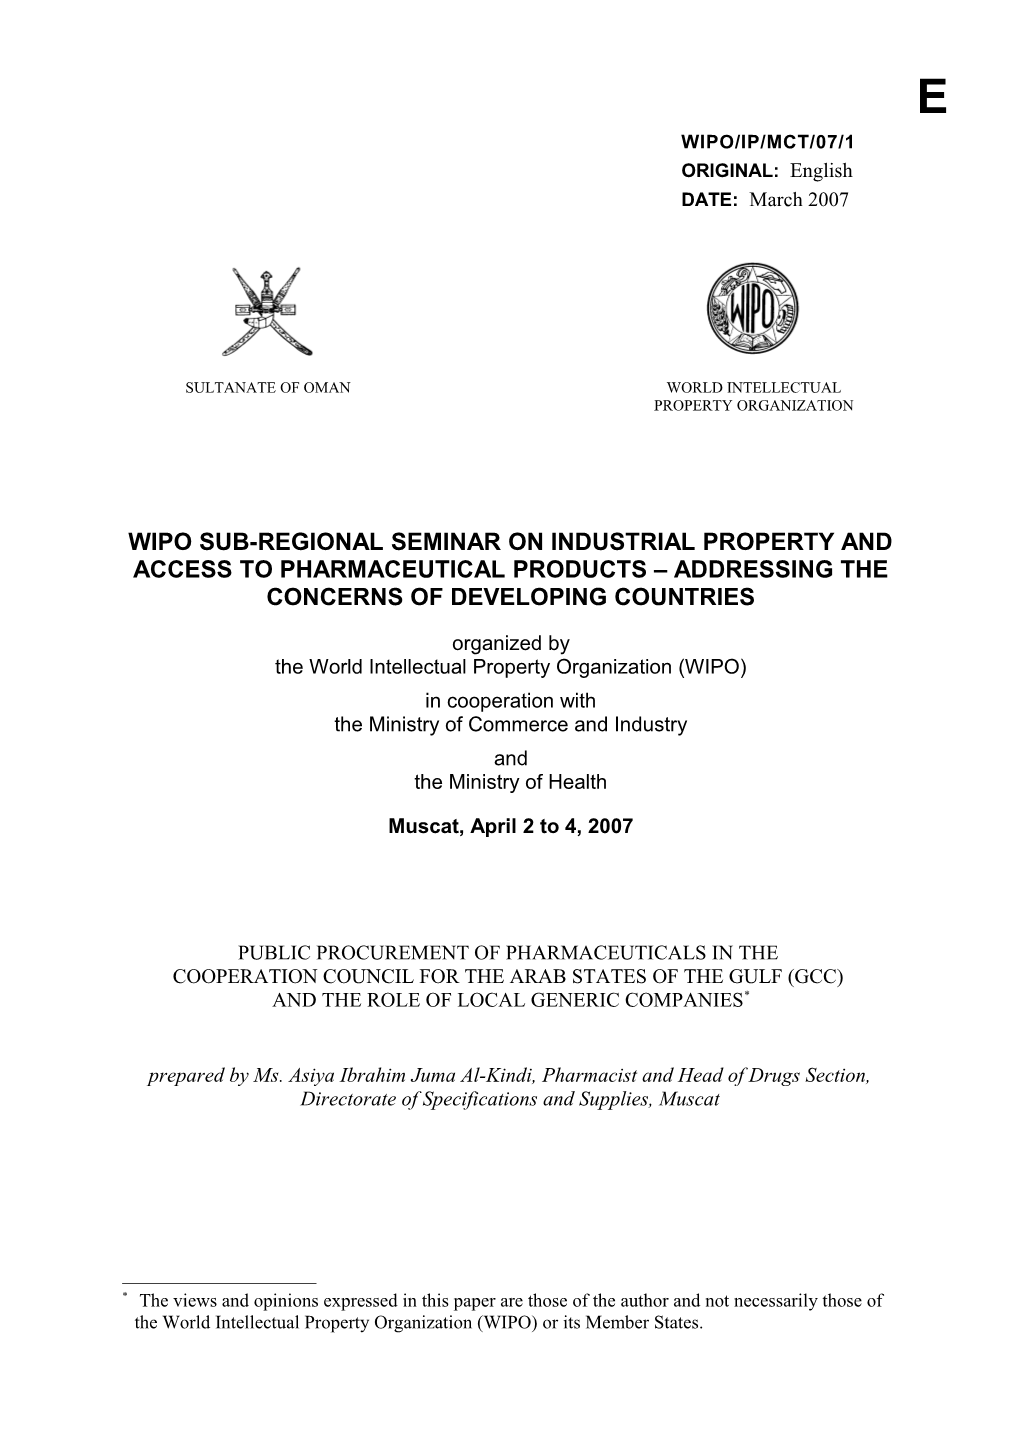 WIPO/IP/MCT/07/1: Public Procurement of Pharmaceuticals in the Cooperaiton Council For